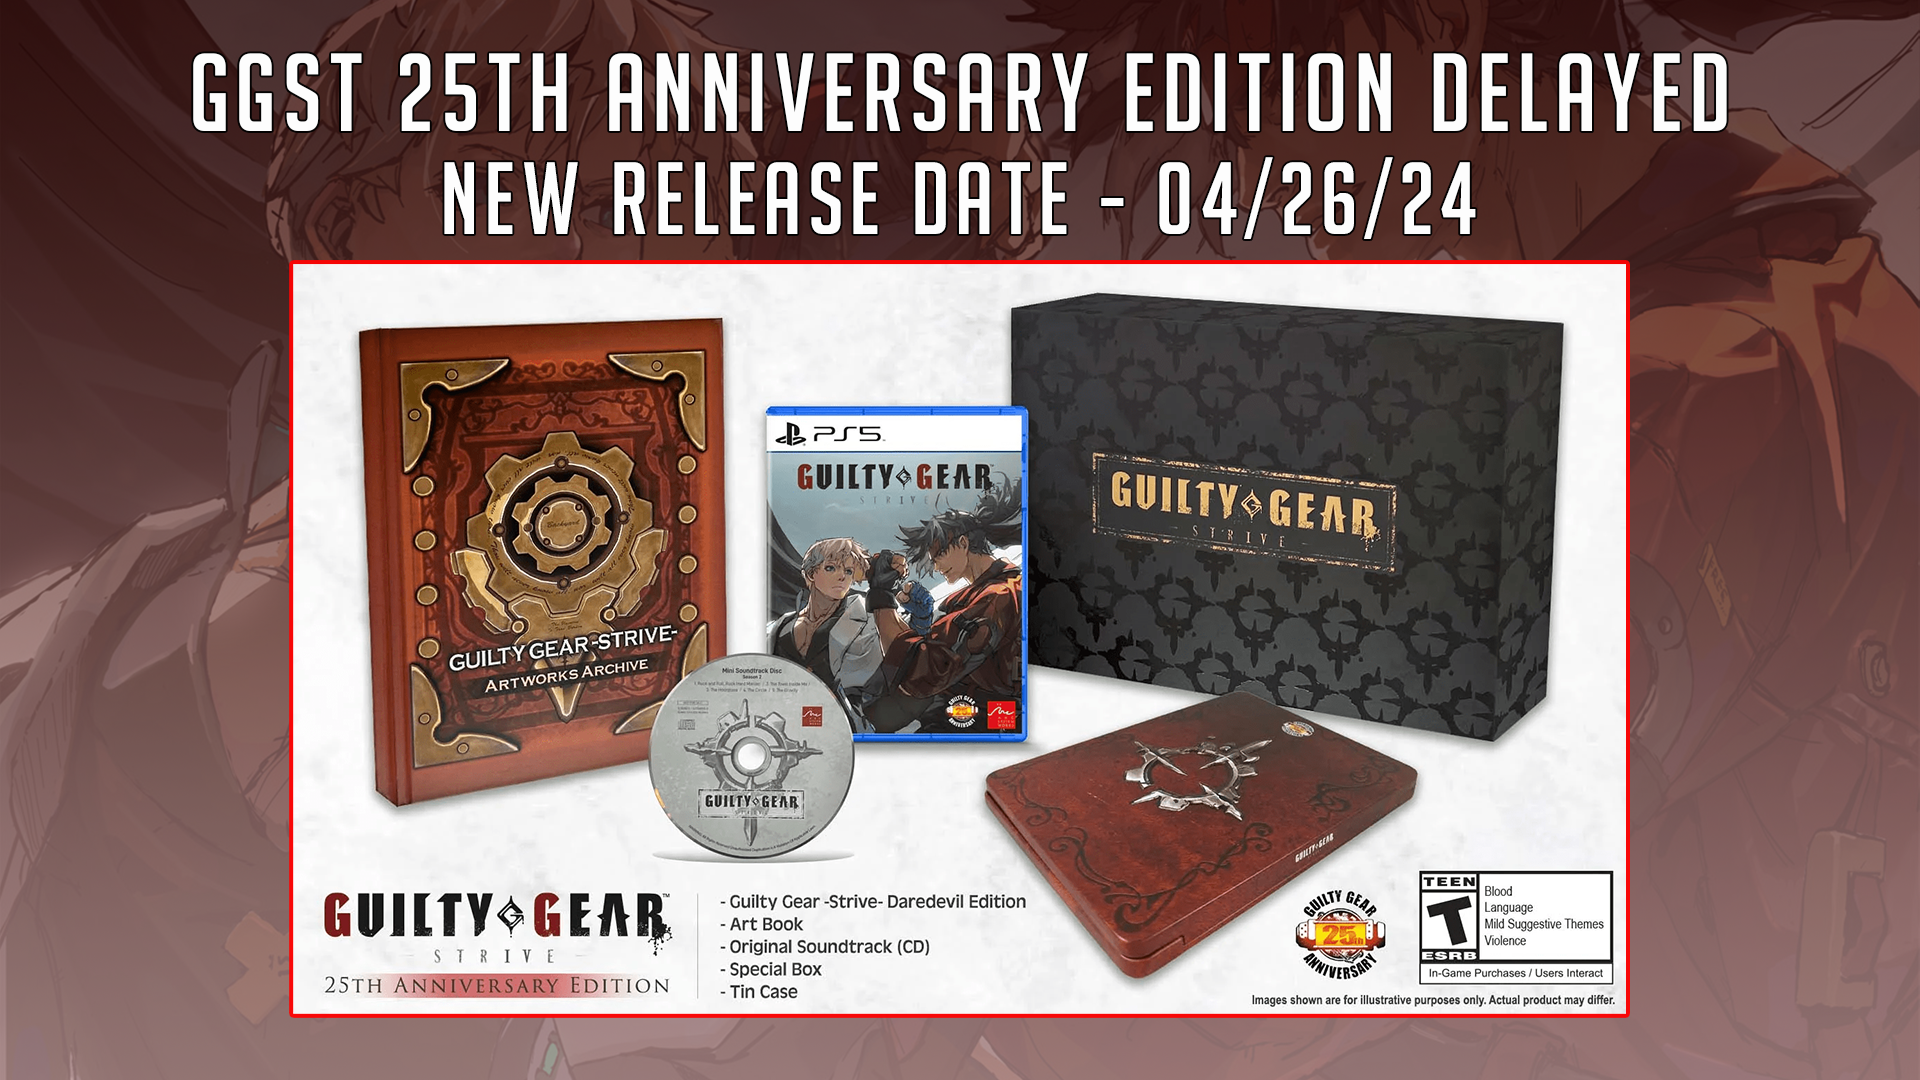 Guilty Gear -Strive- GG 25th Anniversary Edition release pushed back to 4/26/24